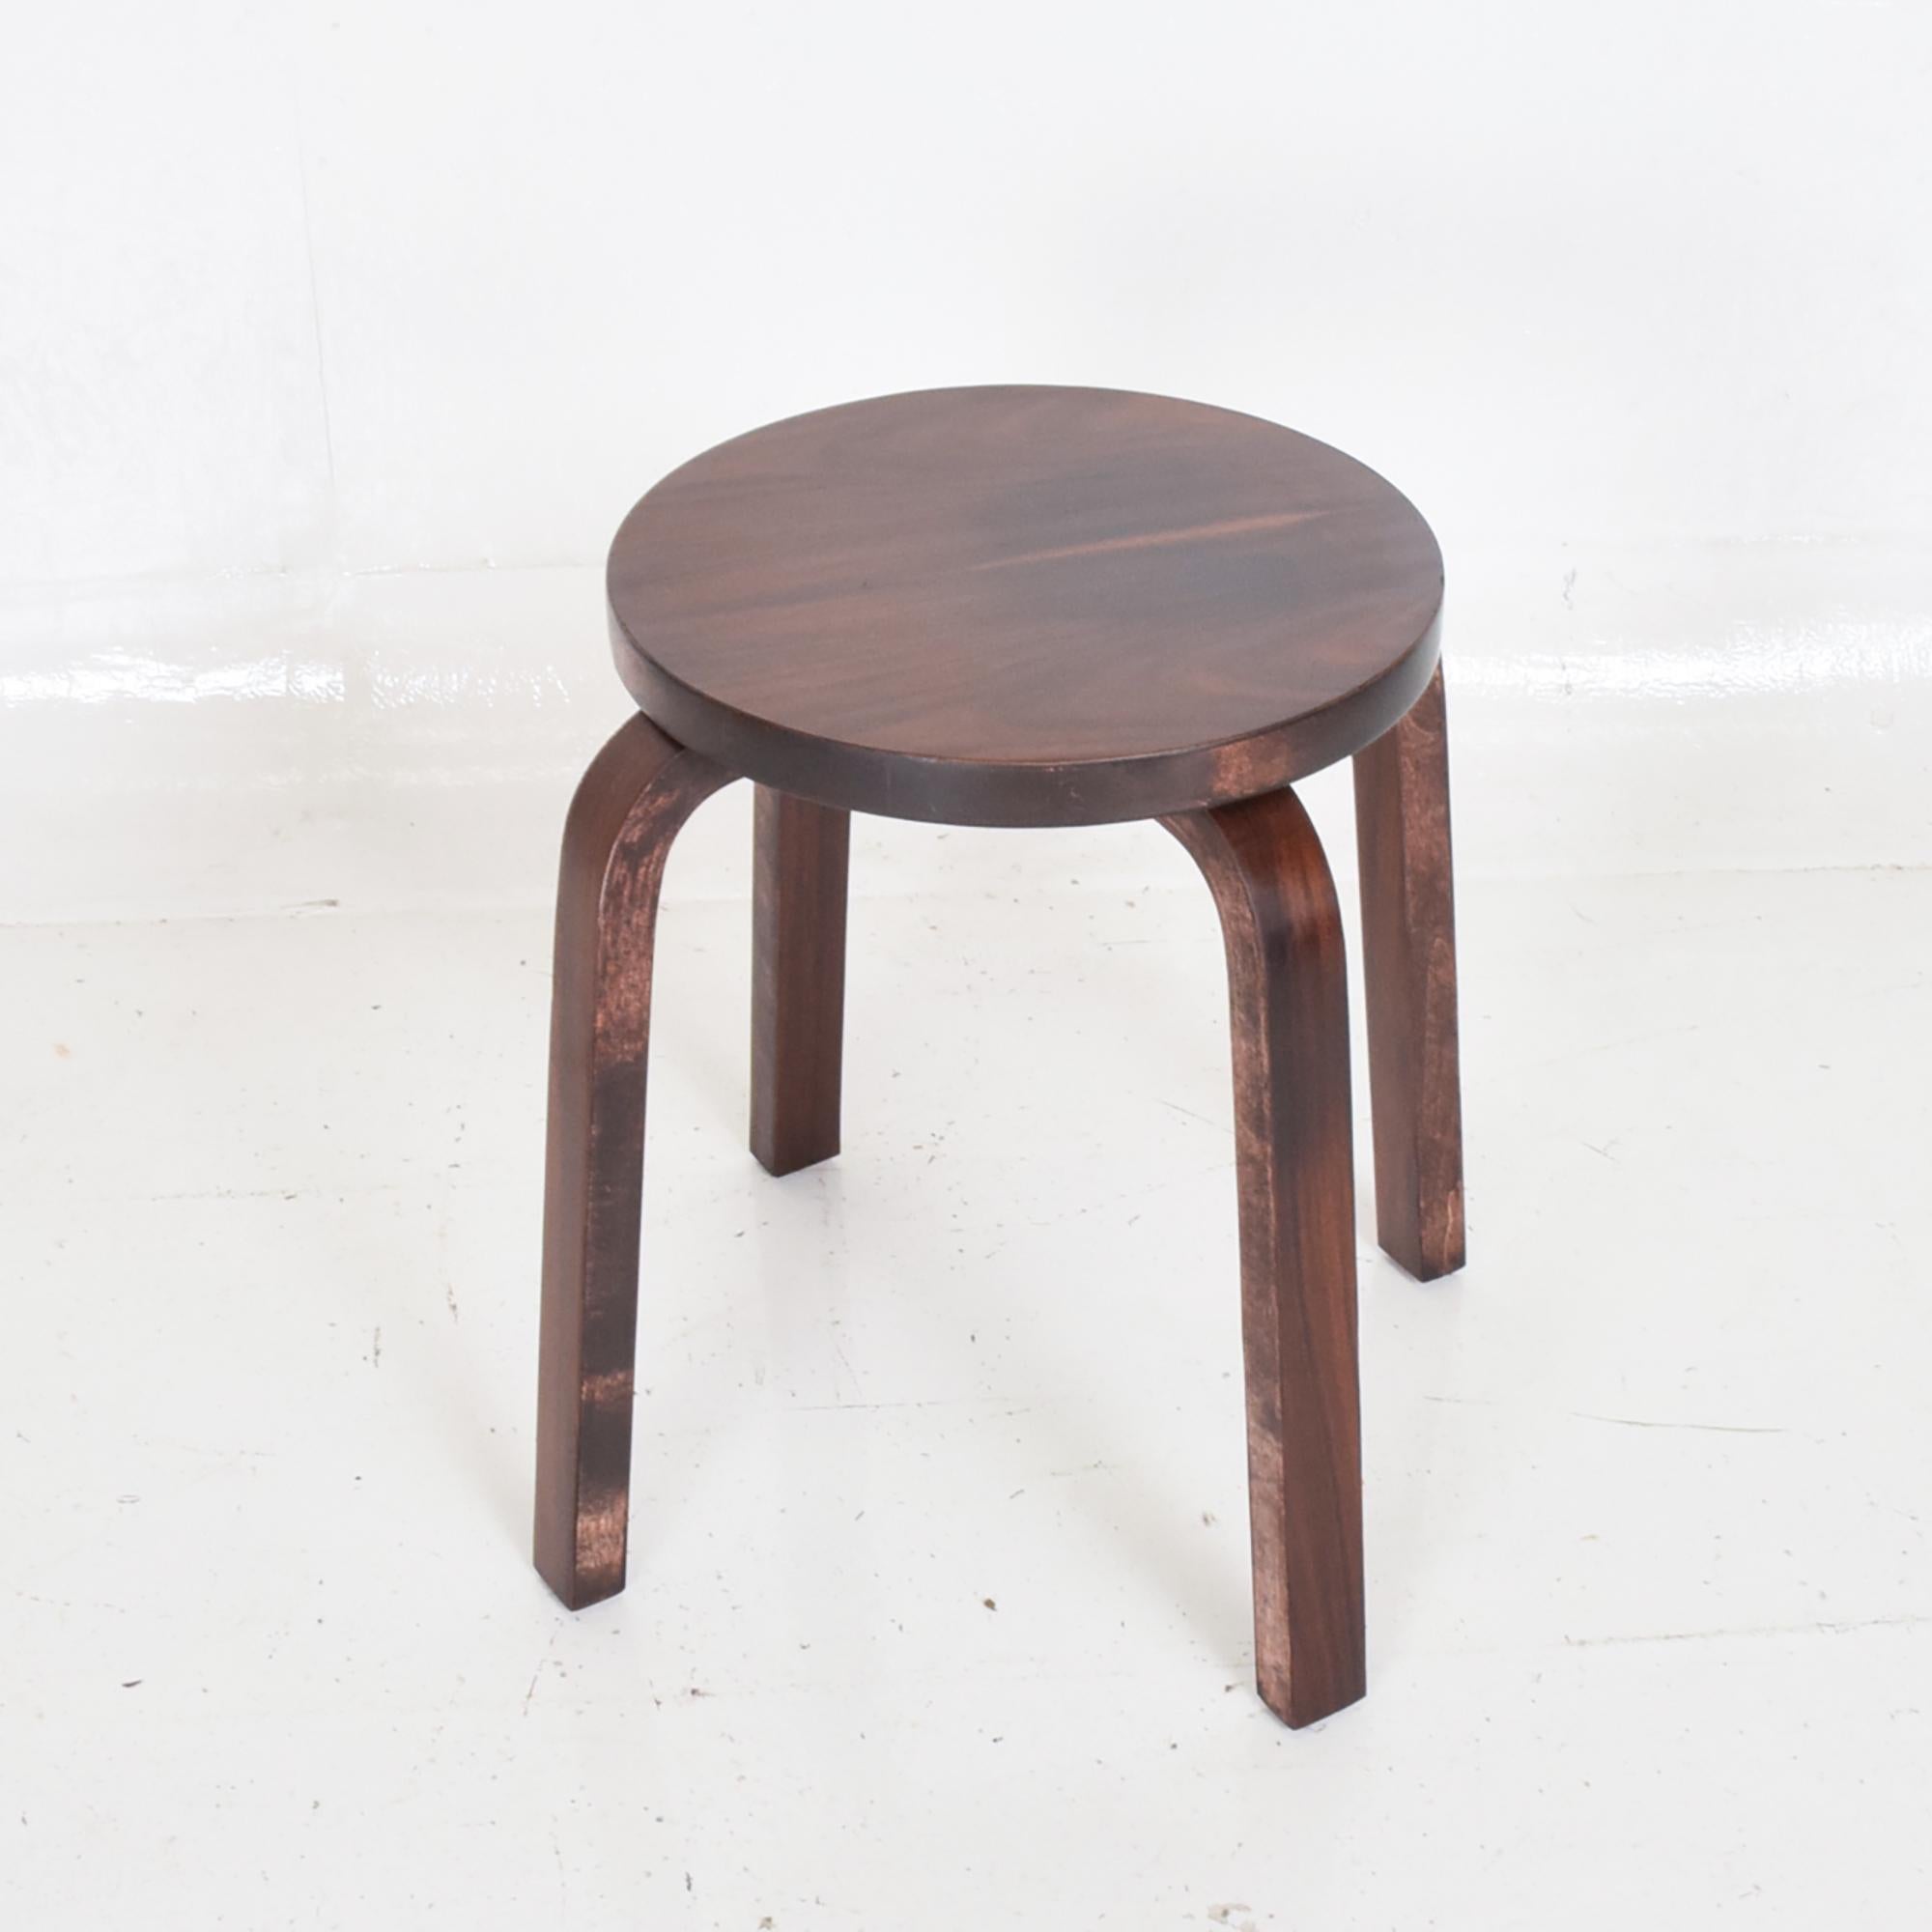 Rosewood low stool E60 iconic design by Alvar Aalto for Artek, Denmark, 1980s
Scandinavian Modern Classic in rosewood 4 leg stool (or useful as small side table) by Alvar Aalto for Artek.
Rich rosewood grain
Dimensions: 13.75 diameter x 19 tall.